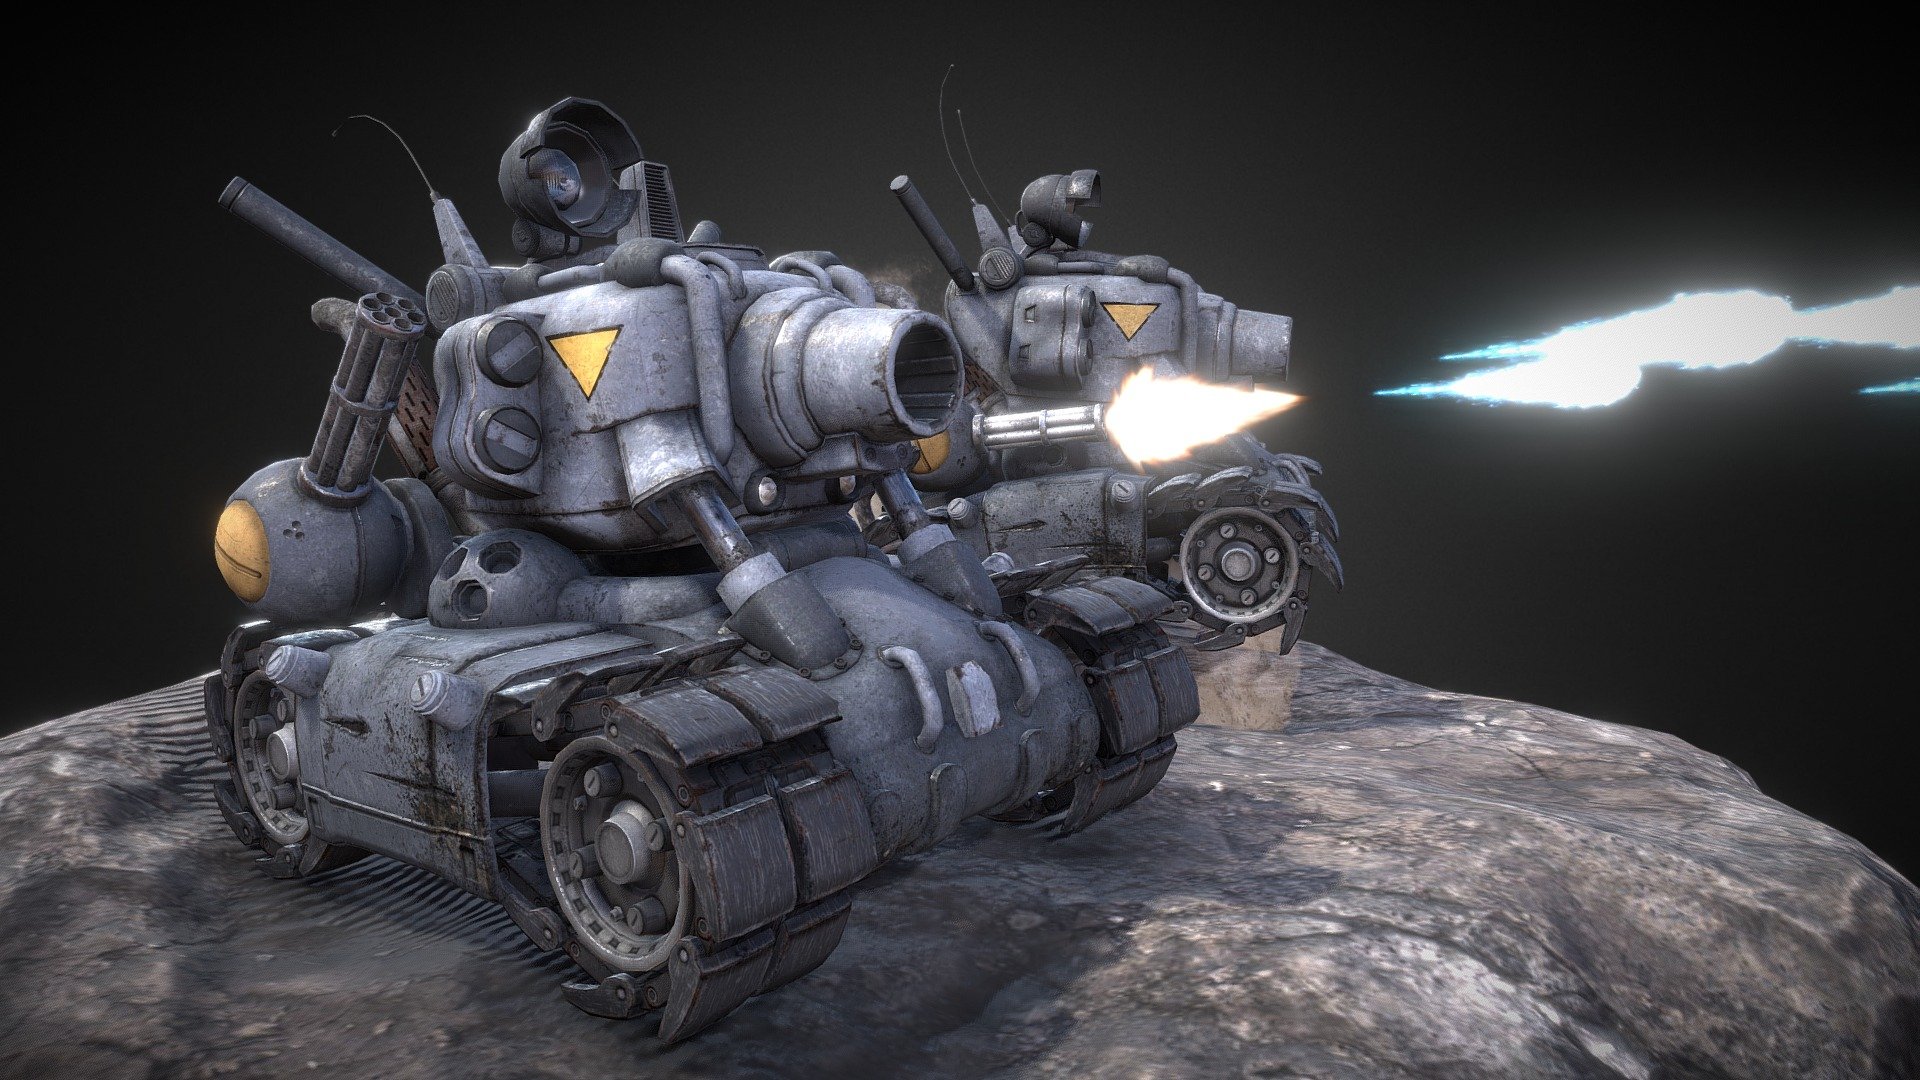 The Metal Slug Tank!!!

Made in Maya &amp; Zbrush, Texturing in Quixel, Mudbox &amp; Photoshop.

More Details on:
http://www.nachocgi.com

Thanks for watching! - Metal Slug 001 - 3D model by Nacho (@nachosanchez) 3d model